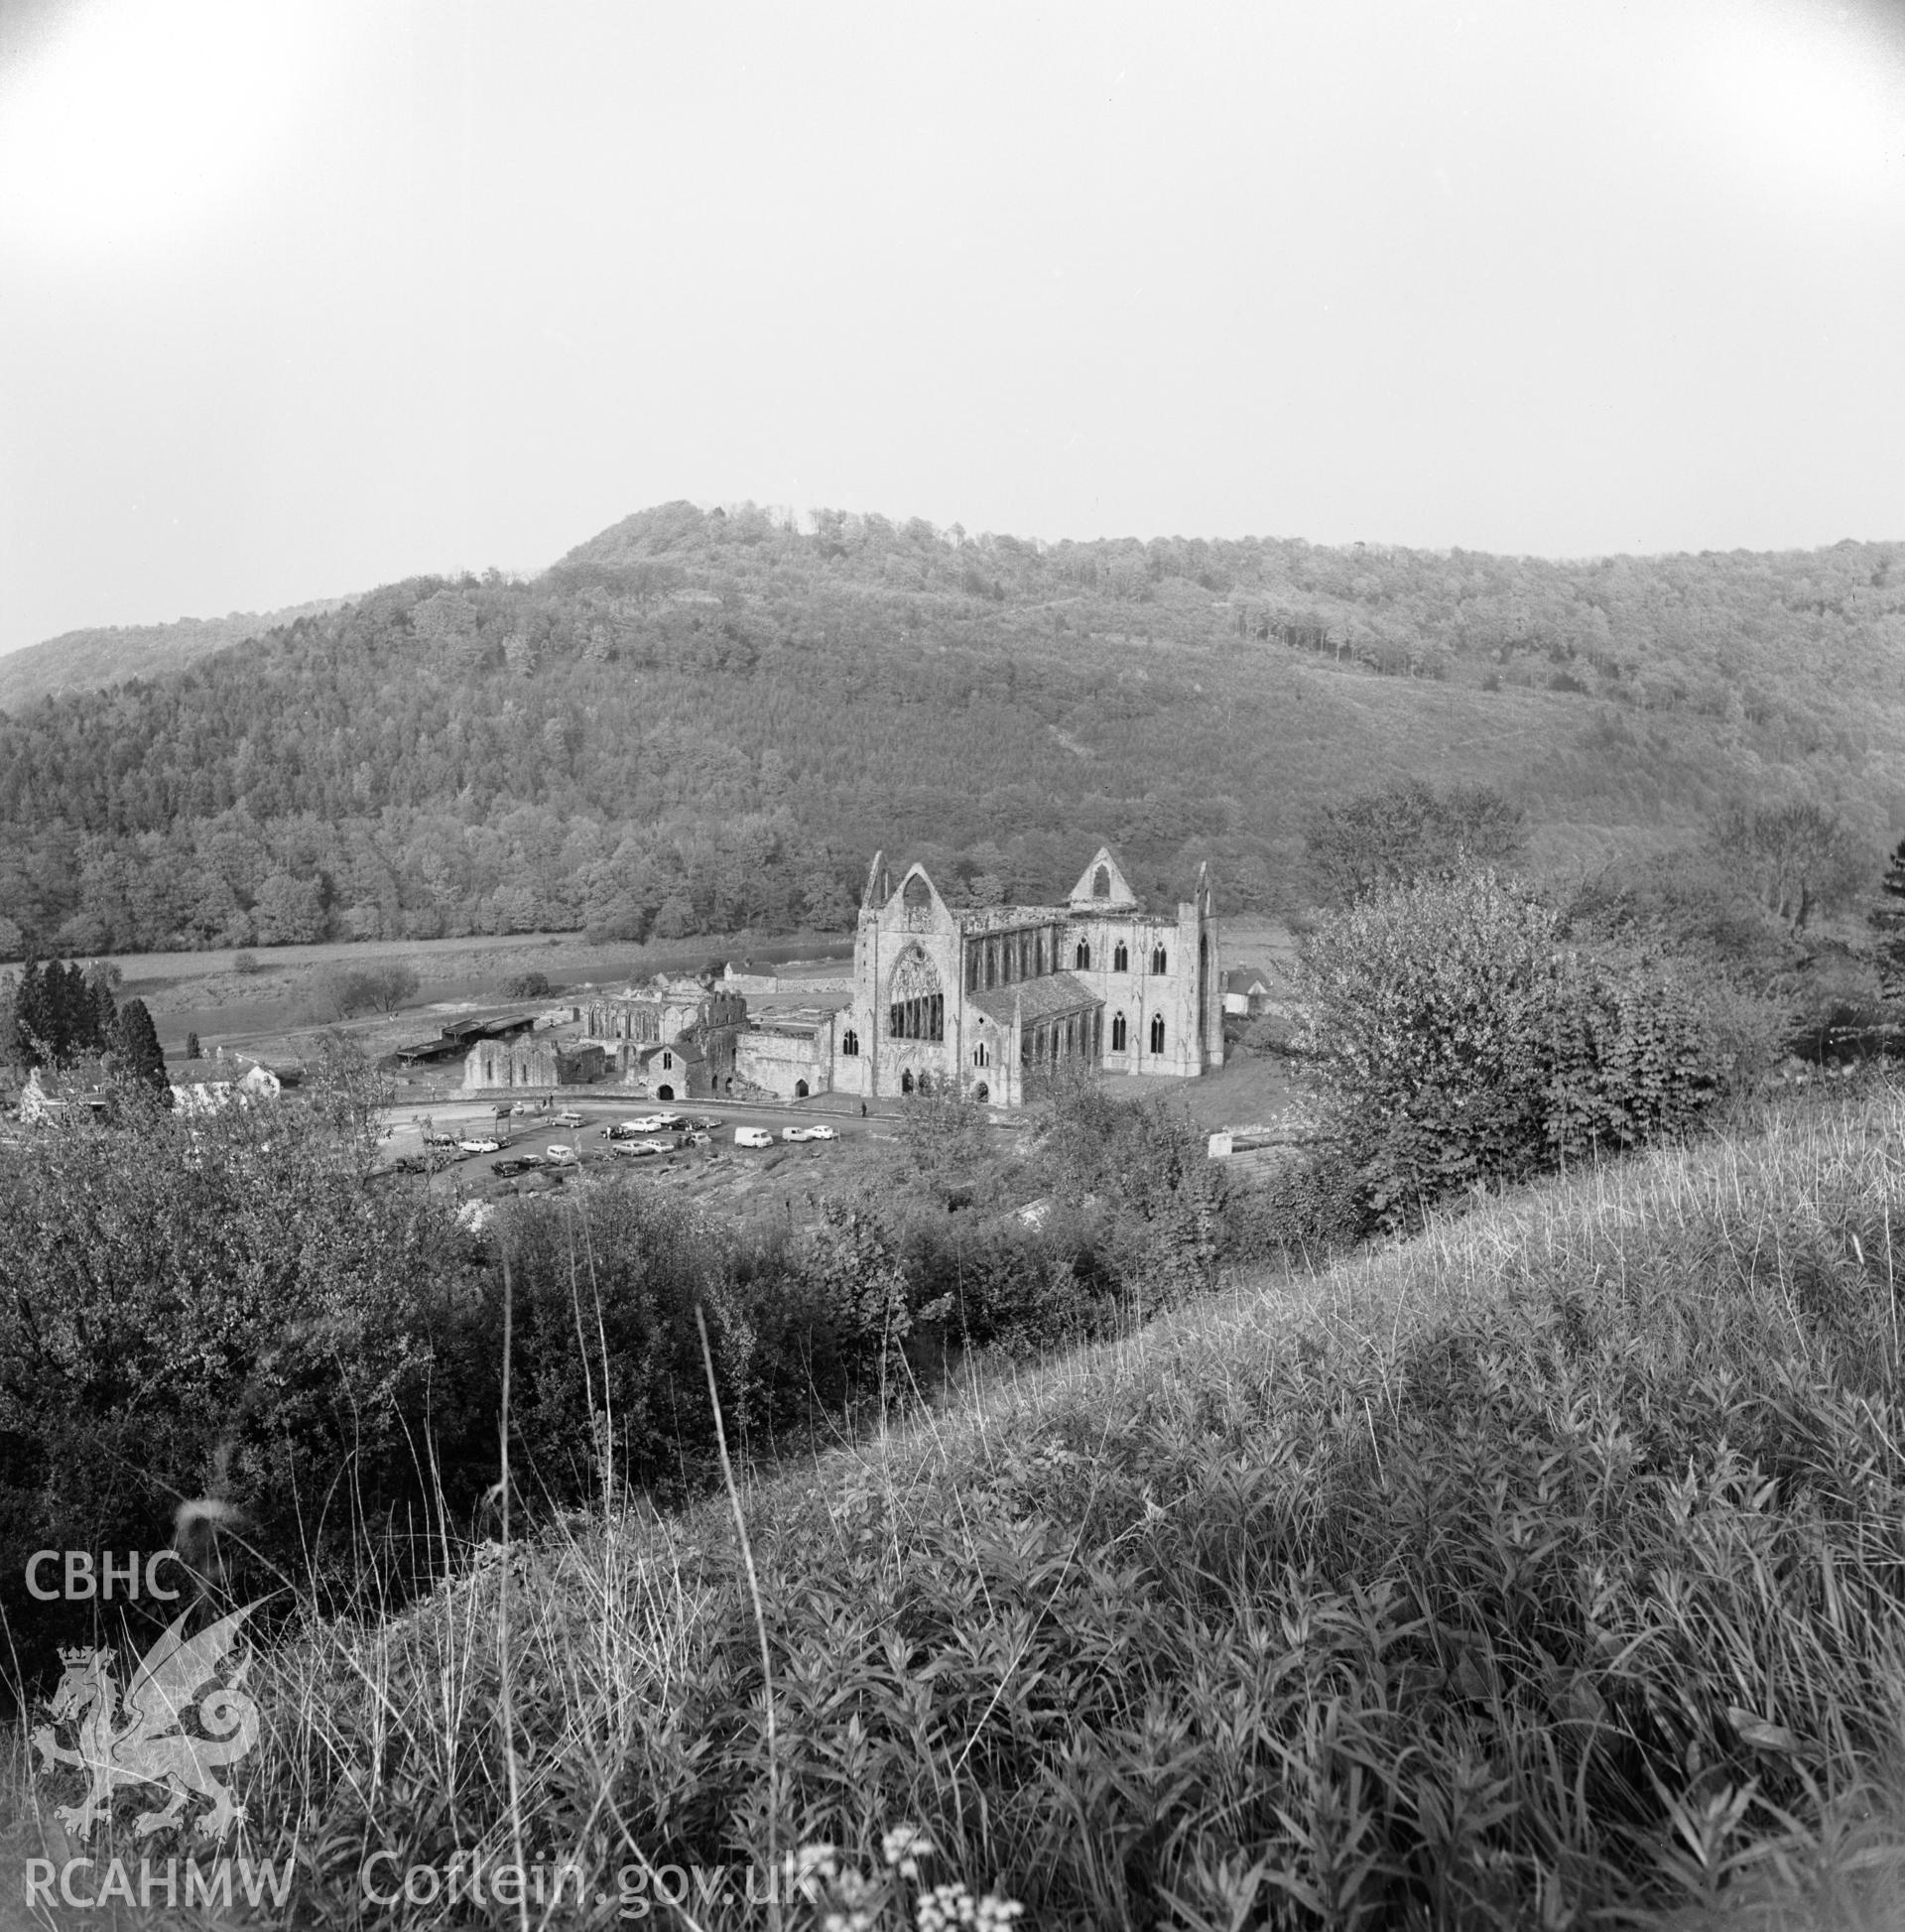 View of Tintern Abbey and surrounding countryside; collated by the former Central Office of Information.